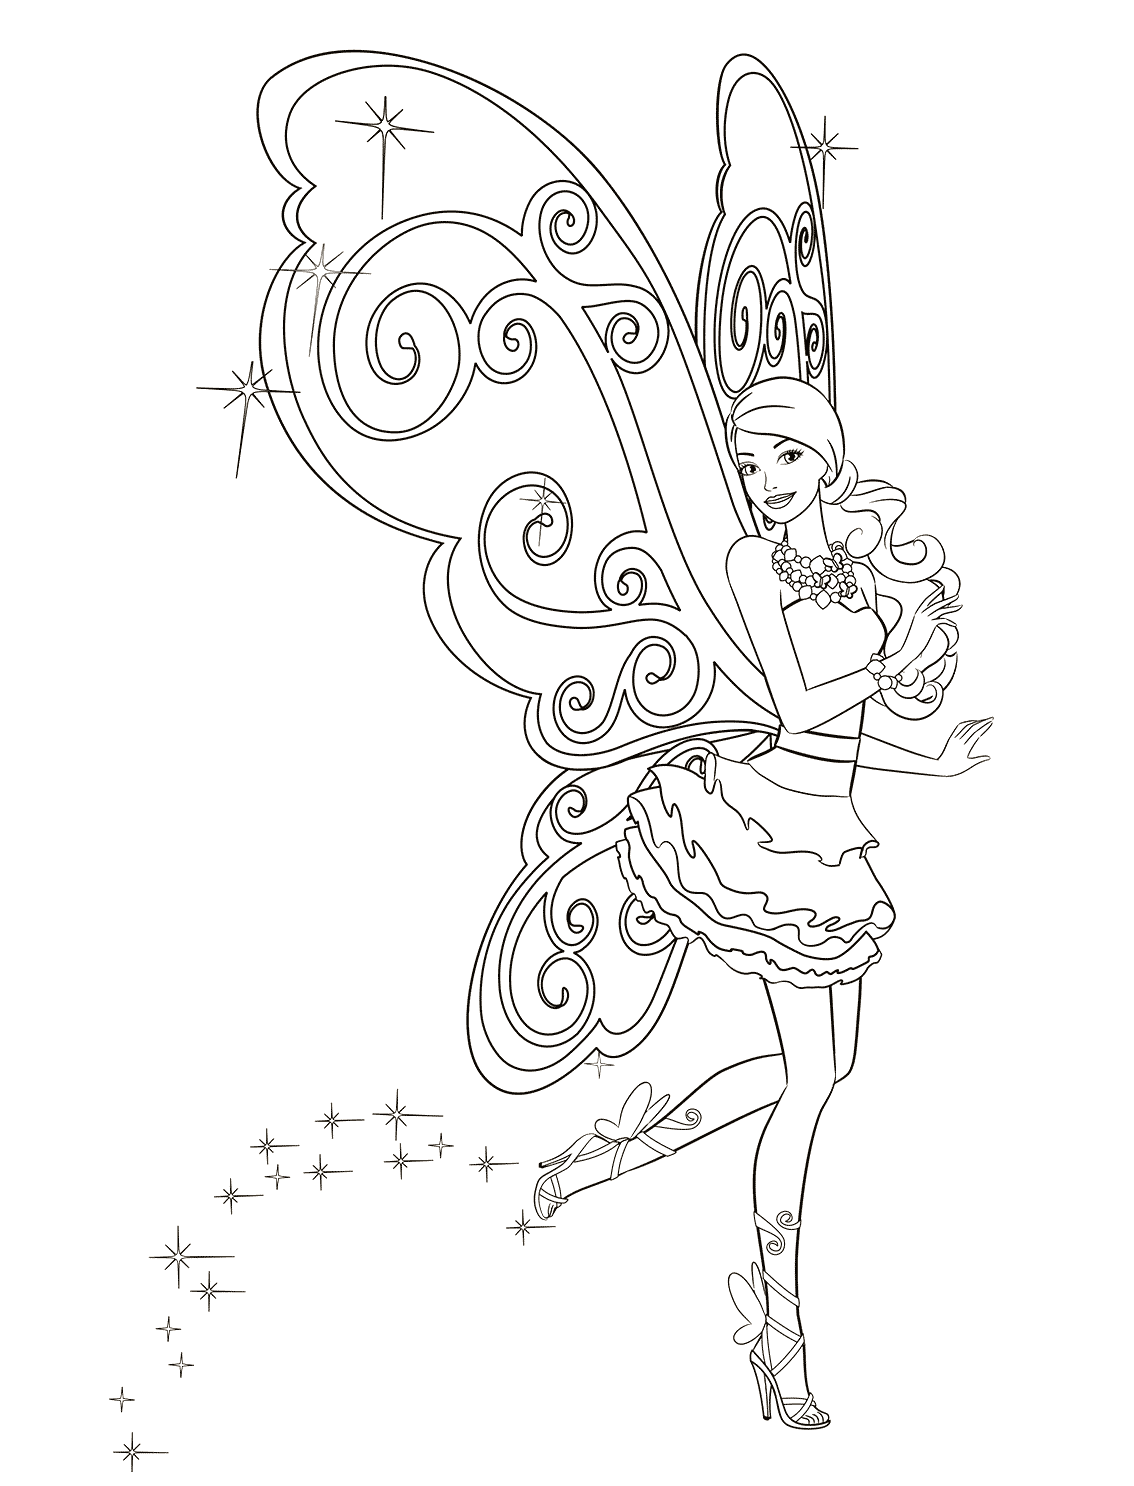 Coloring page - Barbie fairy